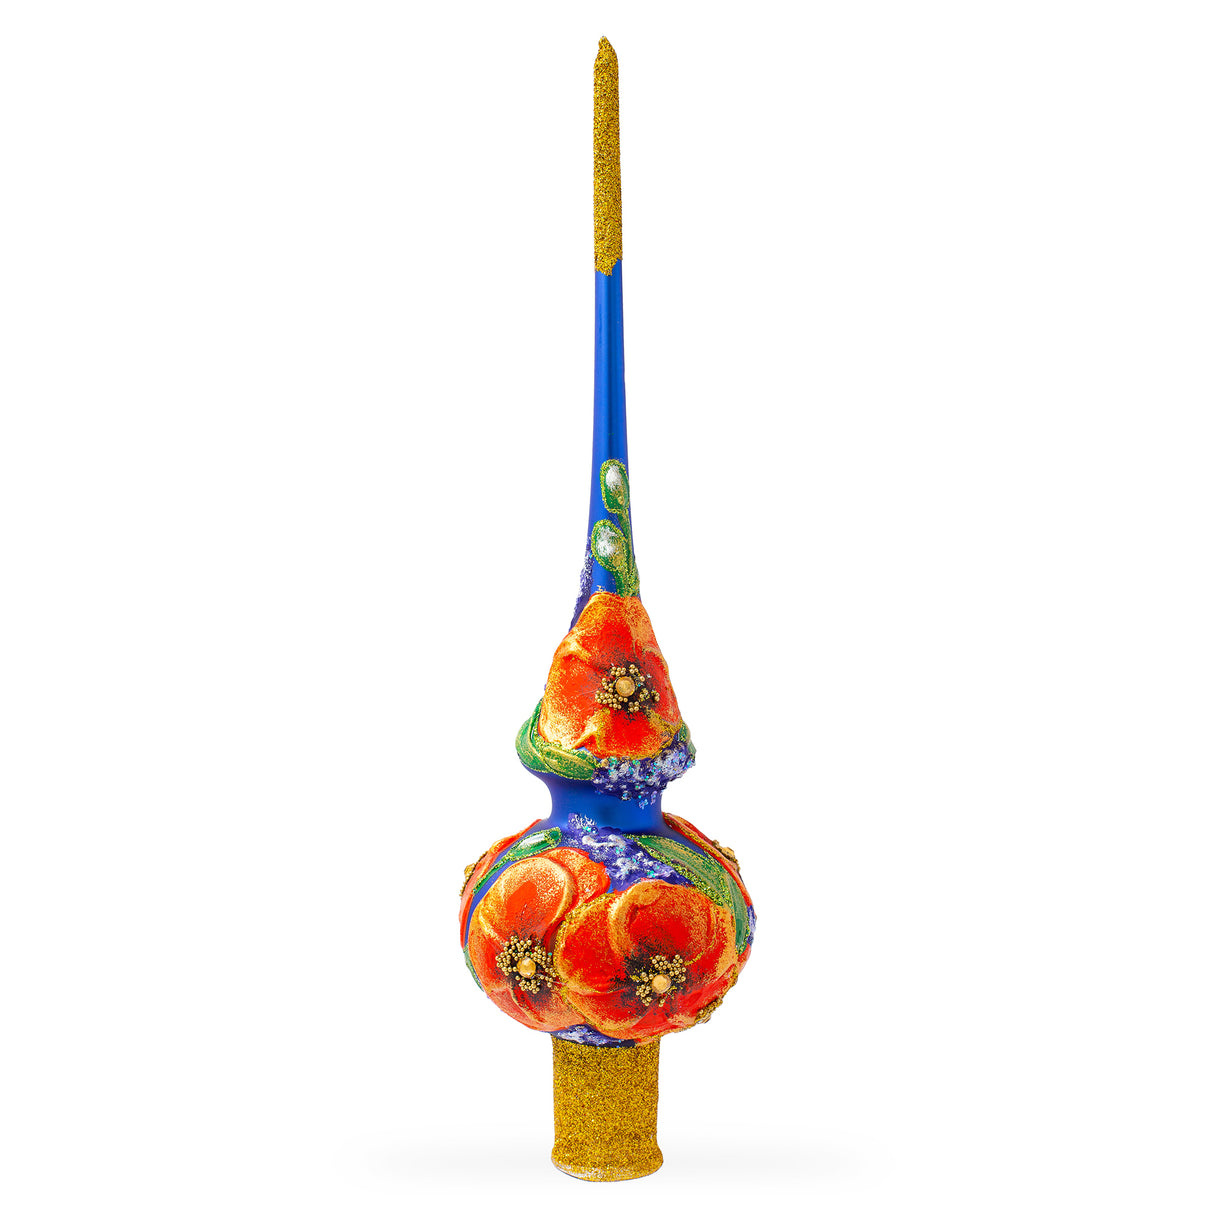 Poppy Flowers on Blue Artisan Hand Crafted Mouth Blown Glass Christmas Tree Topper 11 Inches in Blue color, Triangle shape